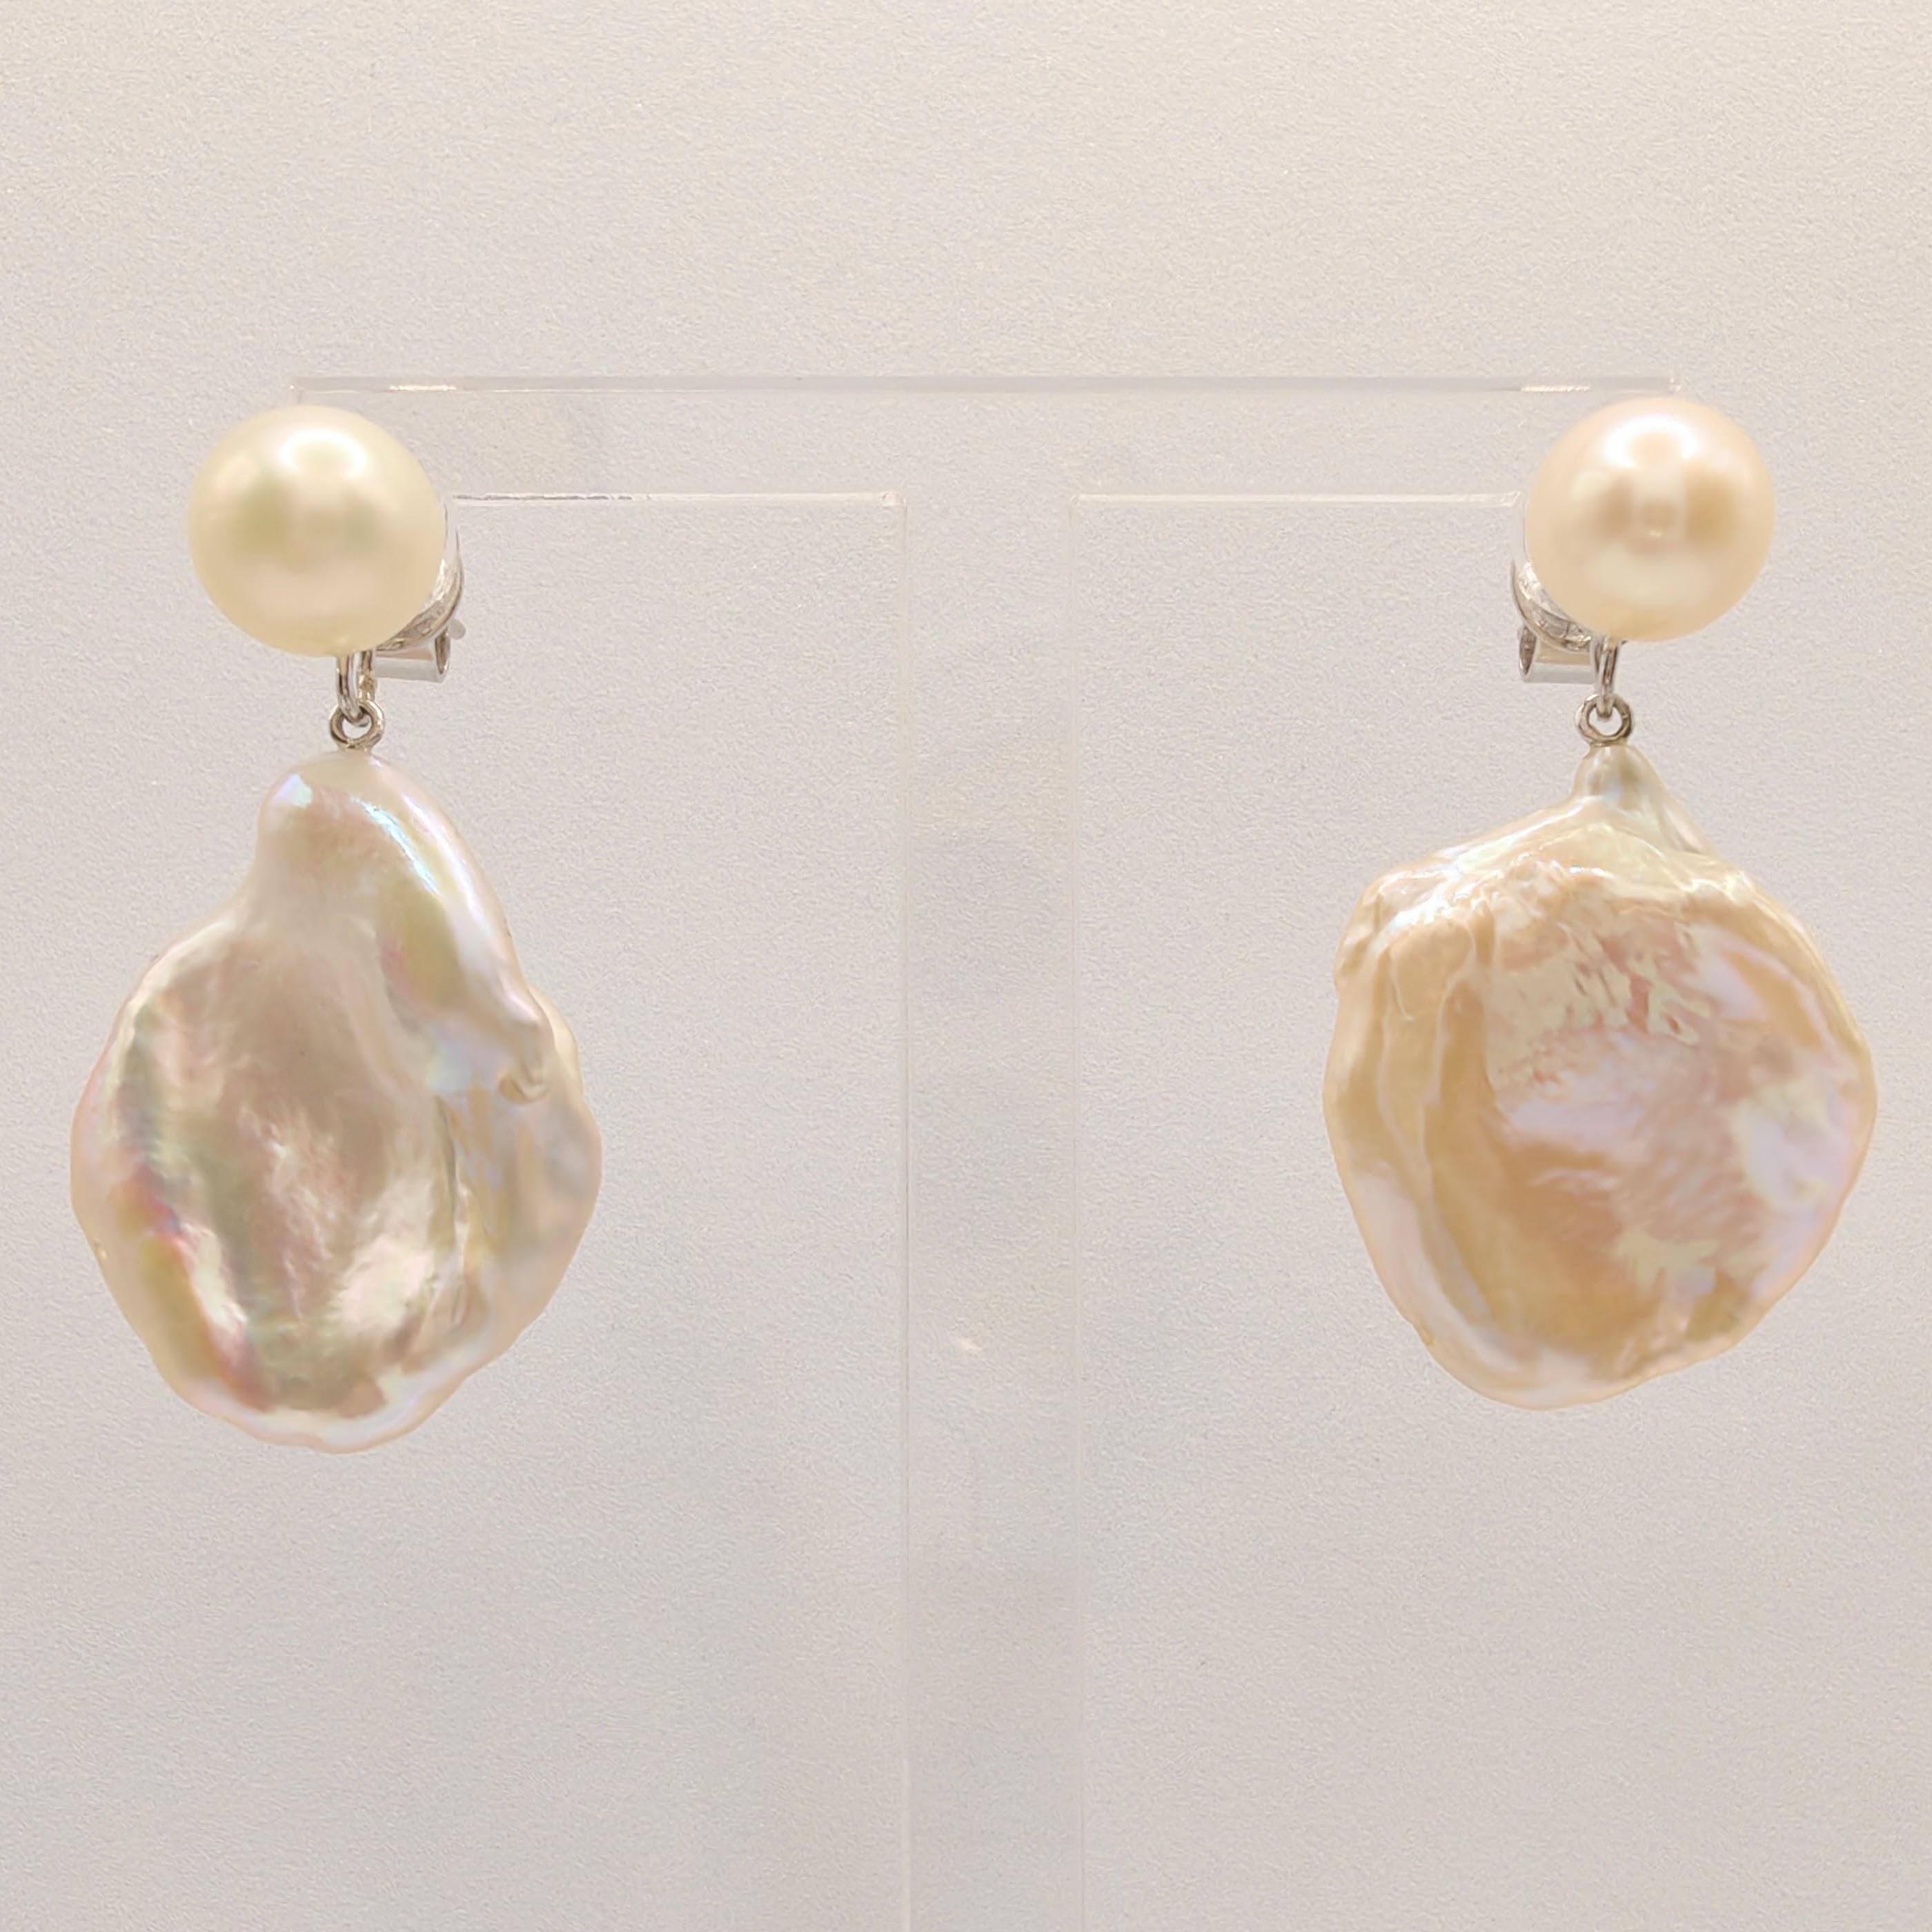 Introducing our versatile Two-Look White Pink Peach Pearl Stud & Keshi Pearl 18K White Gold Drop Earrings, a captivating accessory that offers two distinct and stylish looks in one exquisite piece.

The earrings feature a pair of 8mm Freshwater